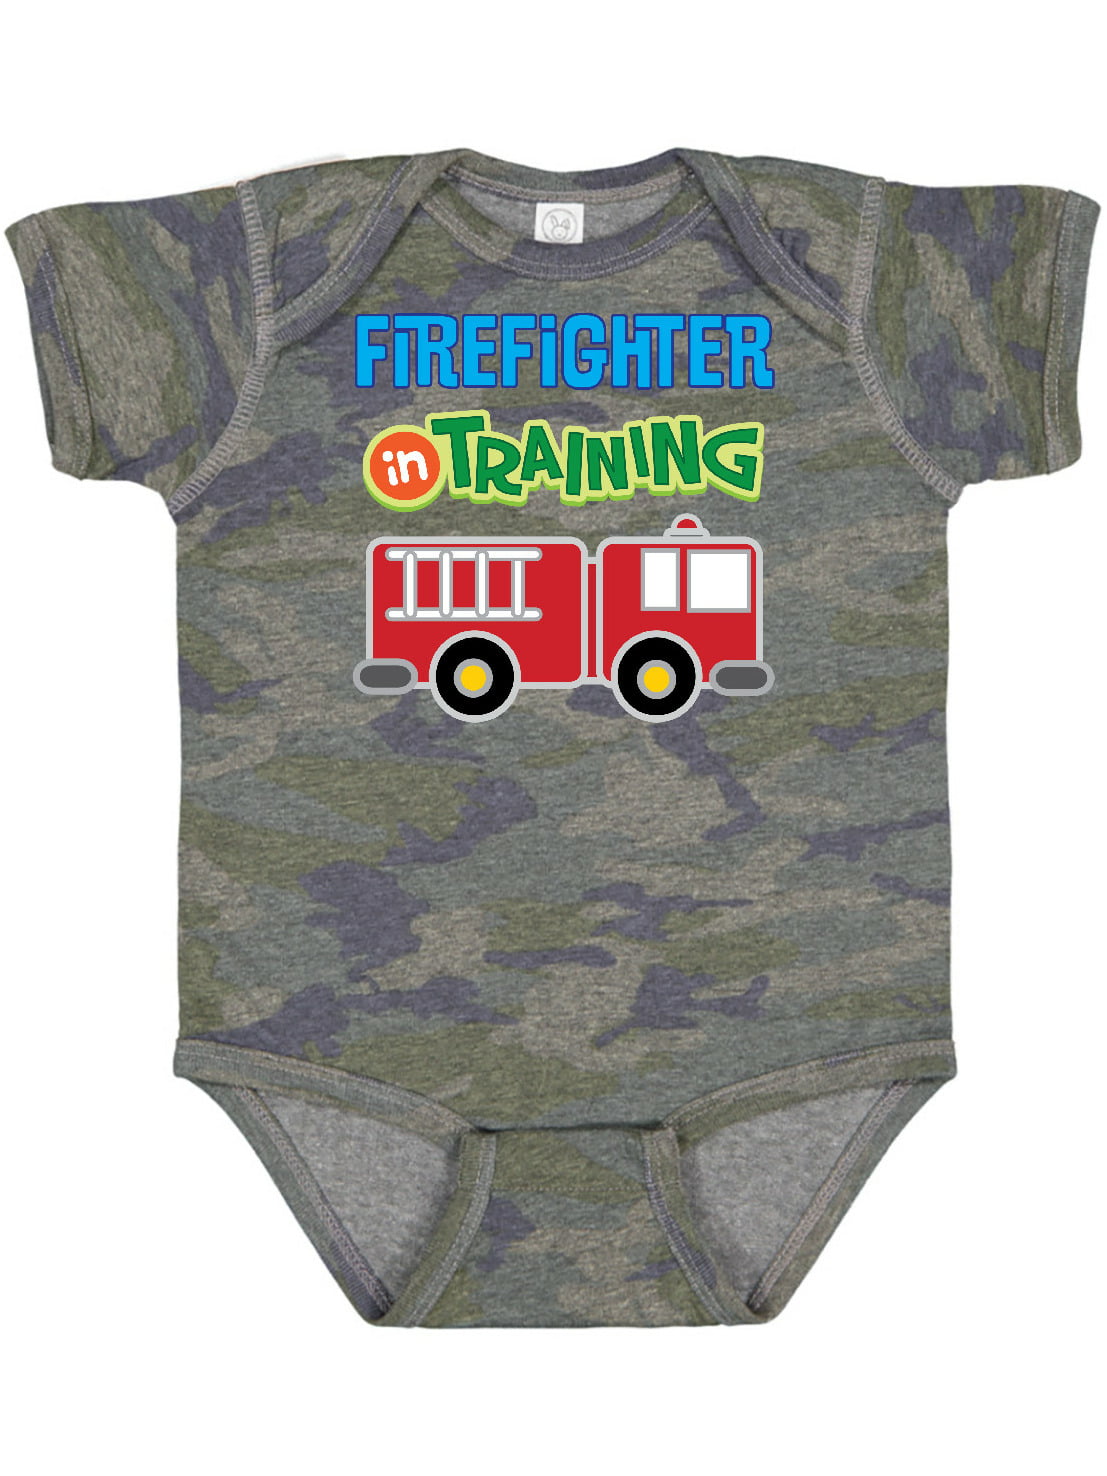 Little Fire Fighter Baby Onesie Fire truck Bodysuit Fireman Shirt Baby Clothes Newborn Coming Home Outfit Cotton brother Baby Shower Gift